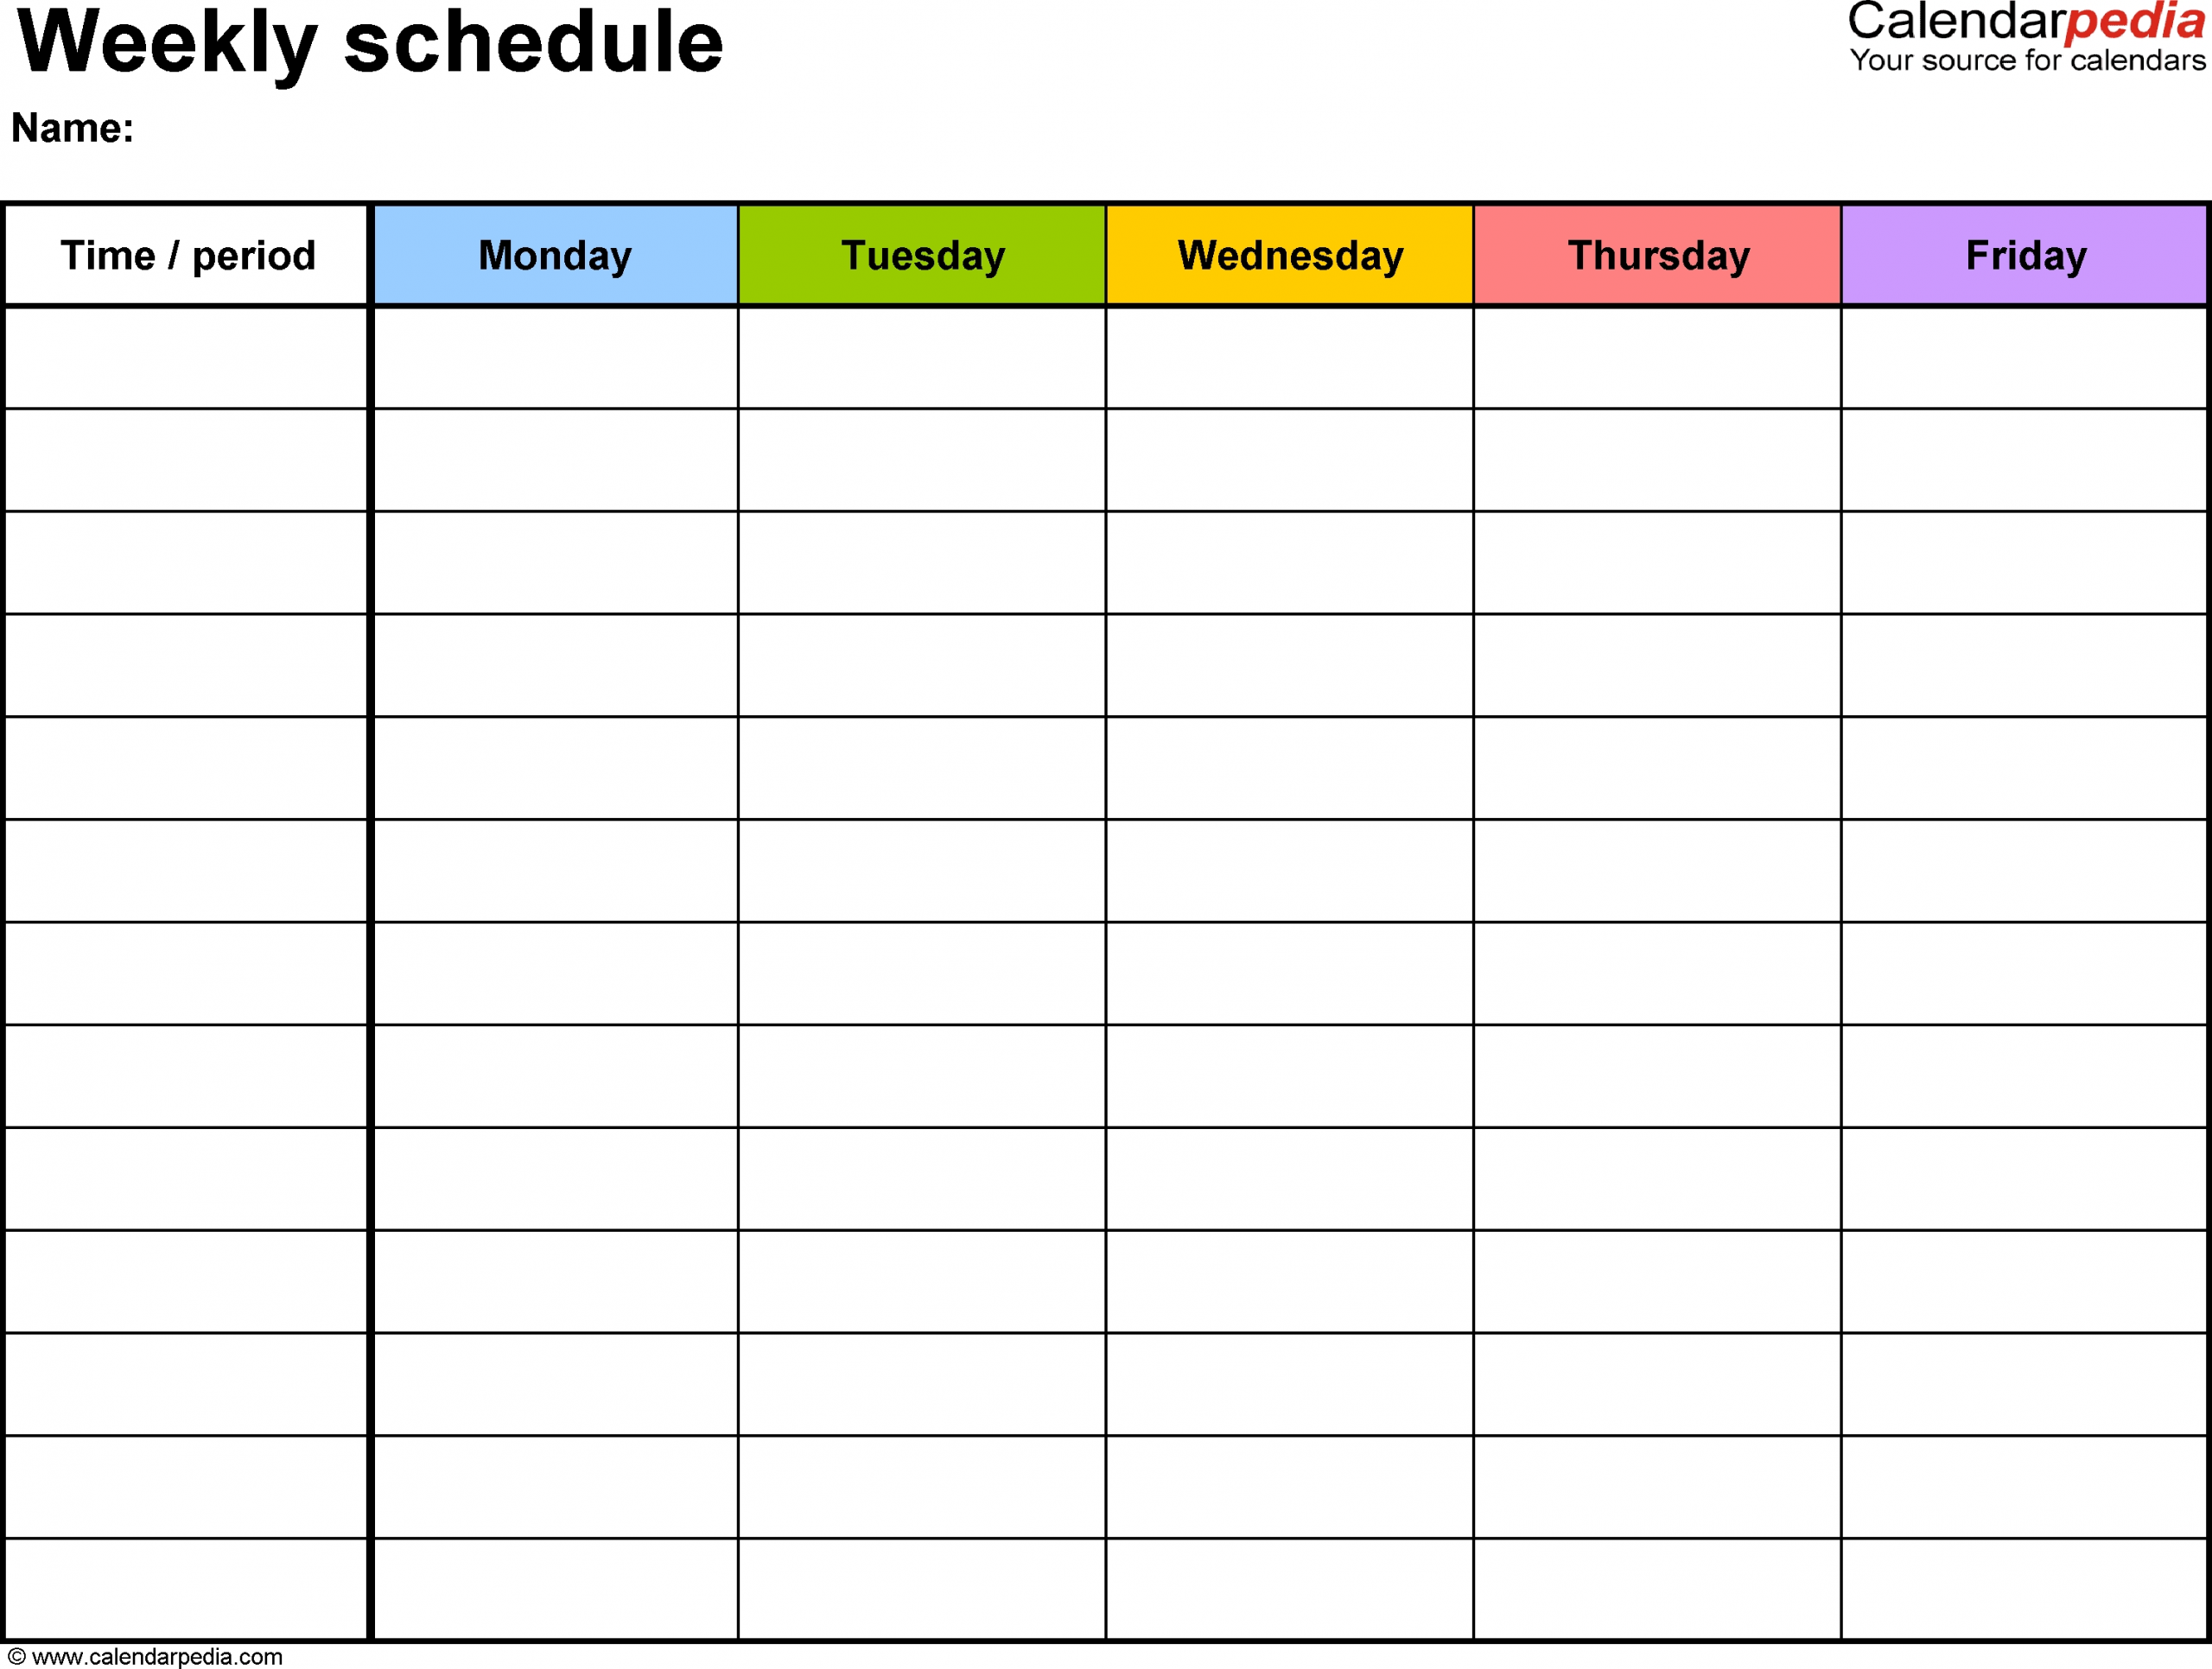 Free Weekly Schedule Templates For Word - 18 Templates in Monday To Friday Schedule Template